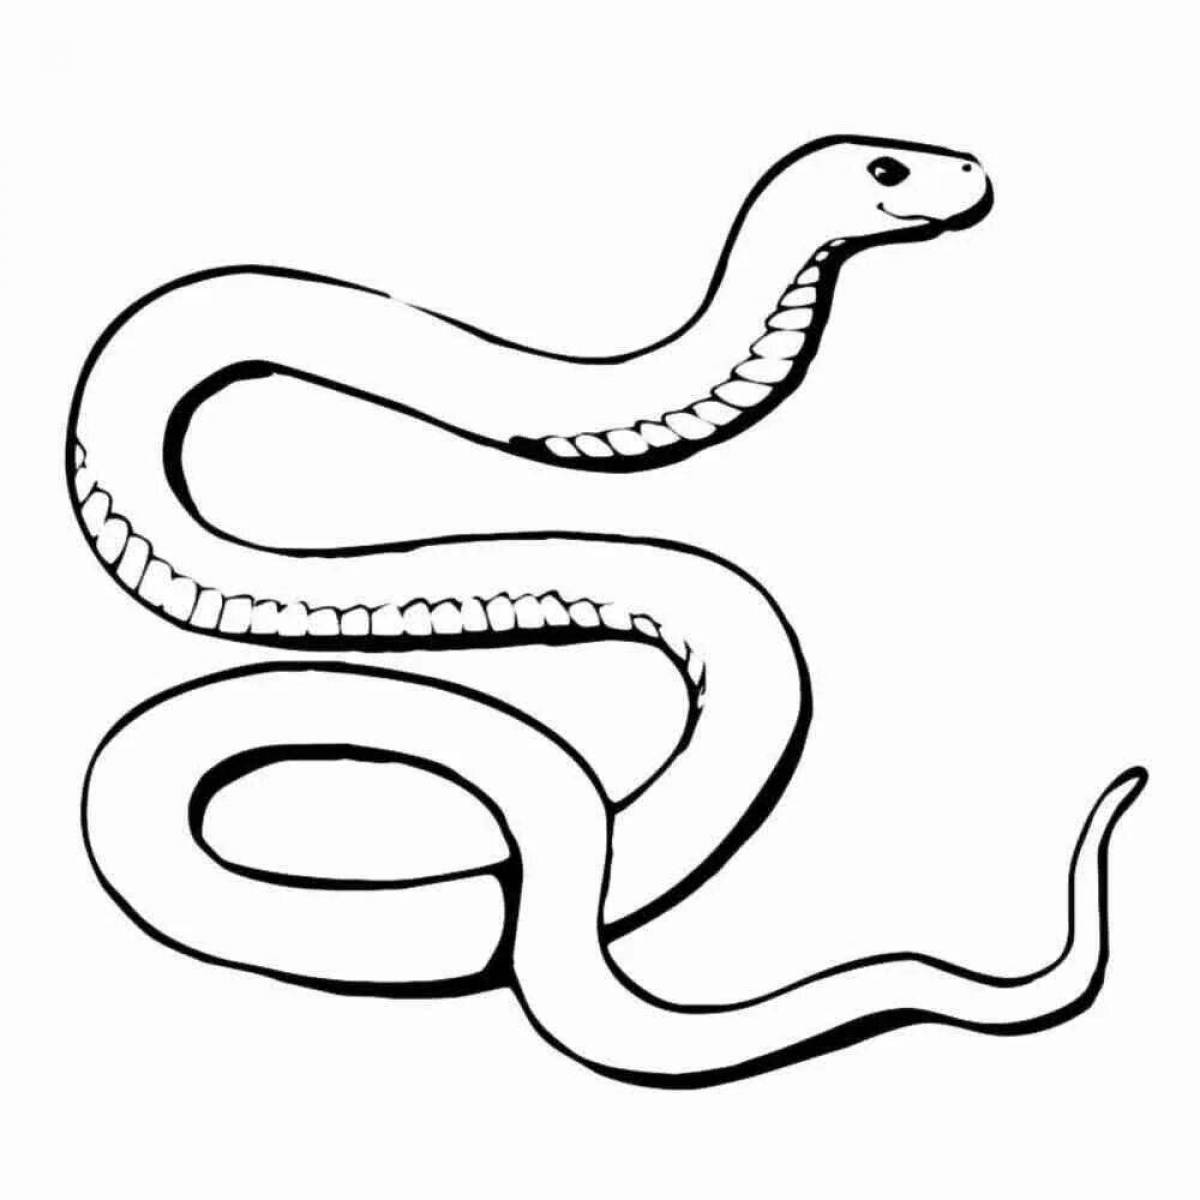 Adorable snake coloring book for kids